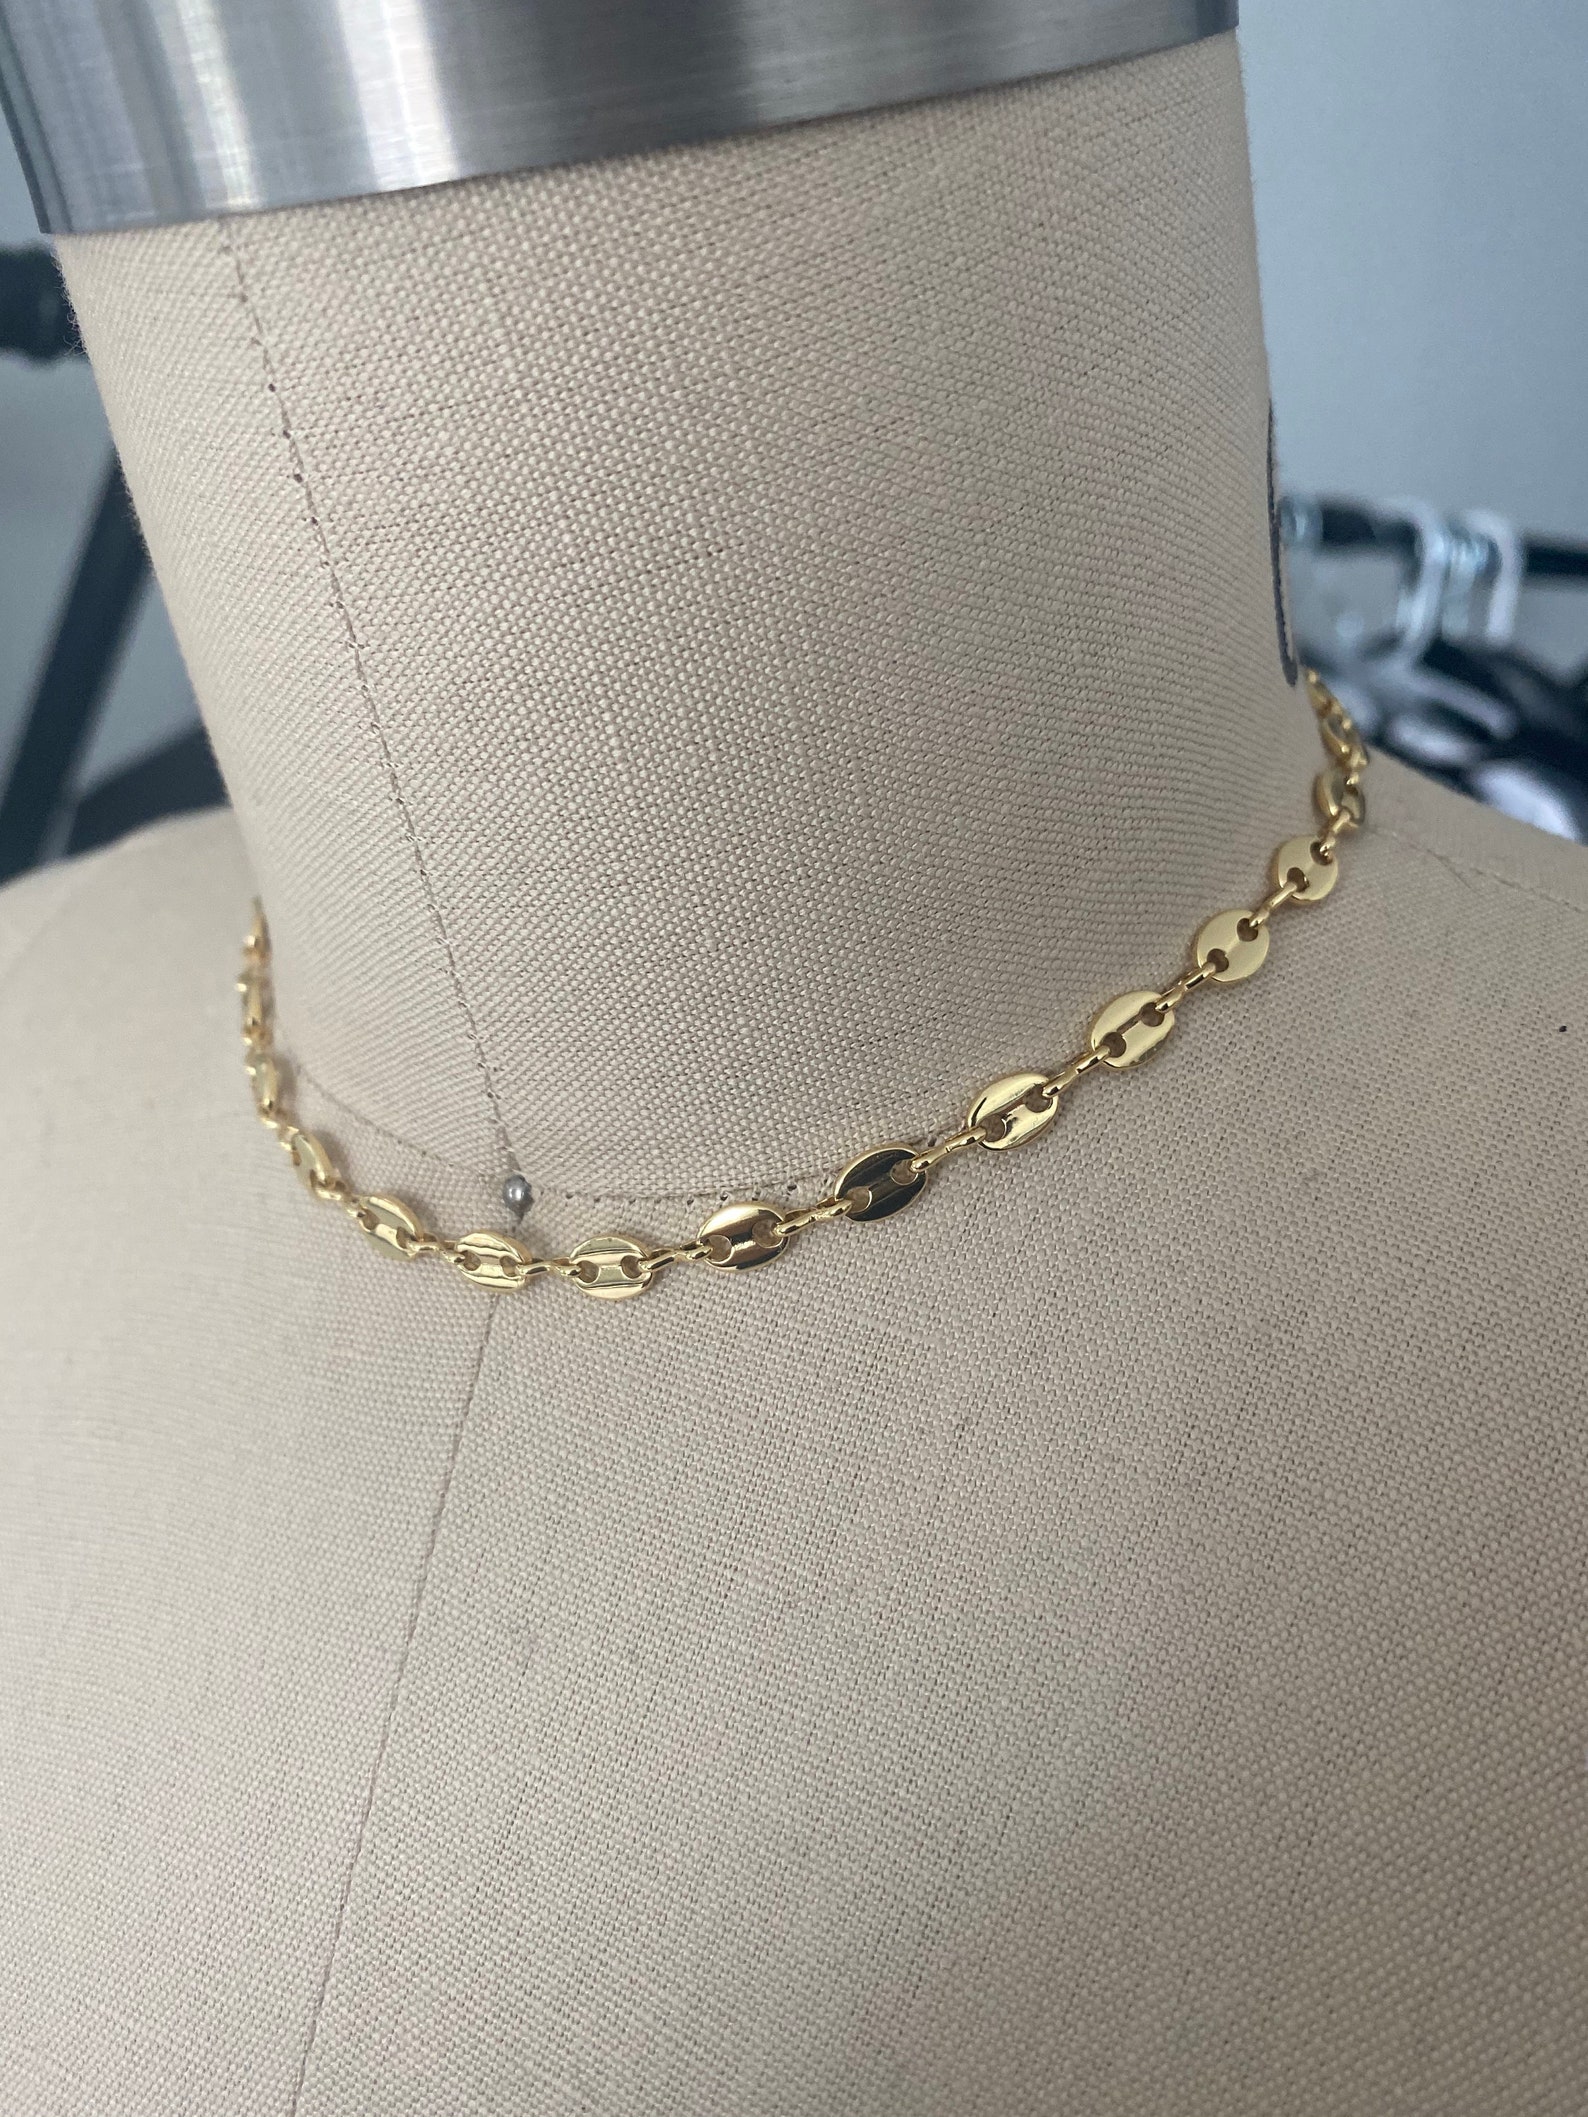 24k Gold Filled Anchor Gucci Necklace Choker Women's | Etsy